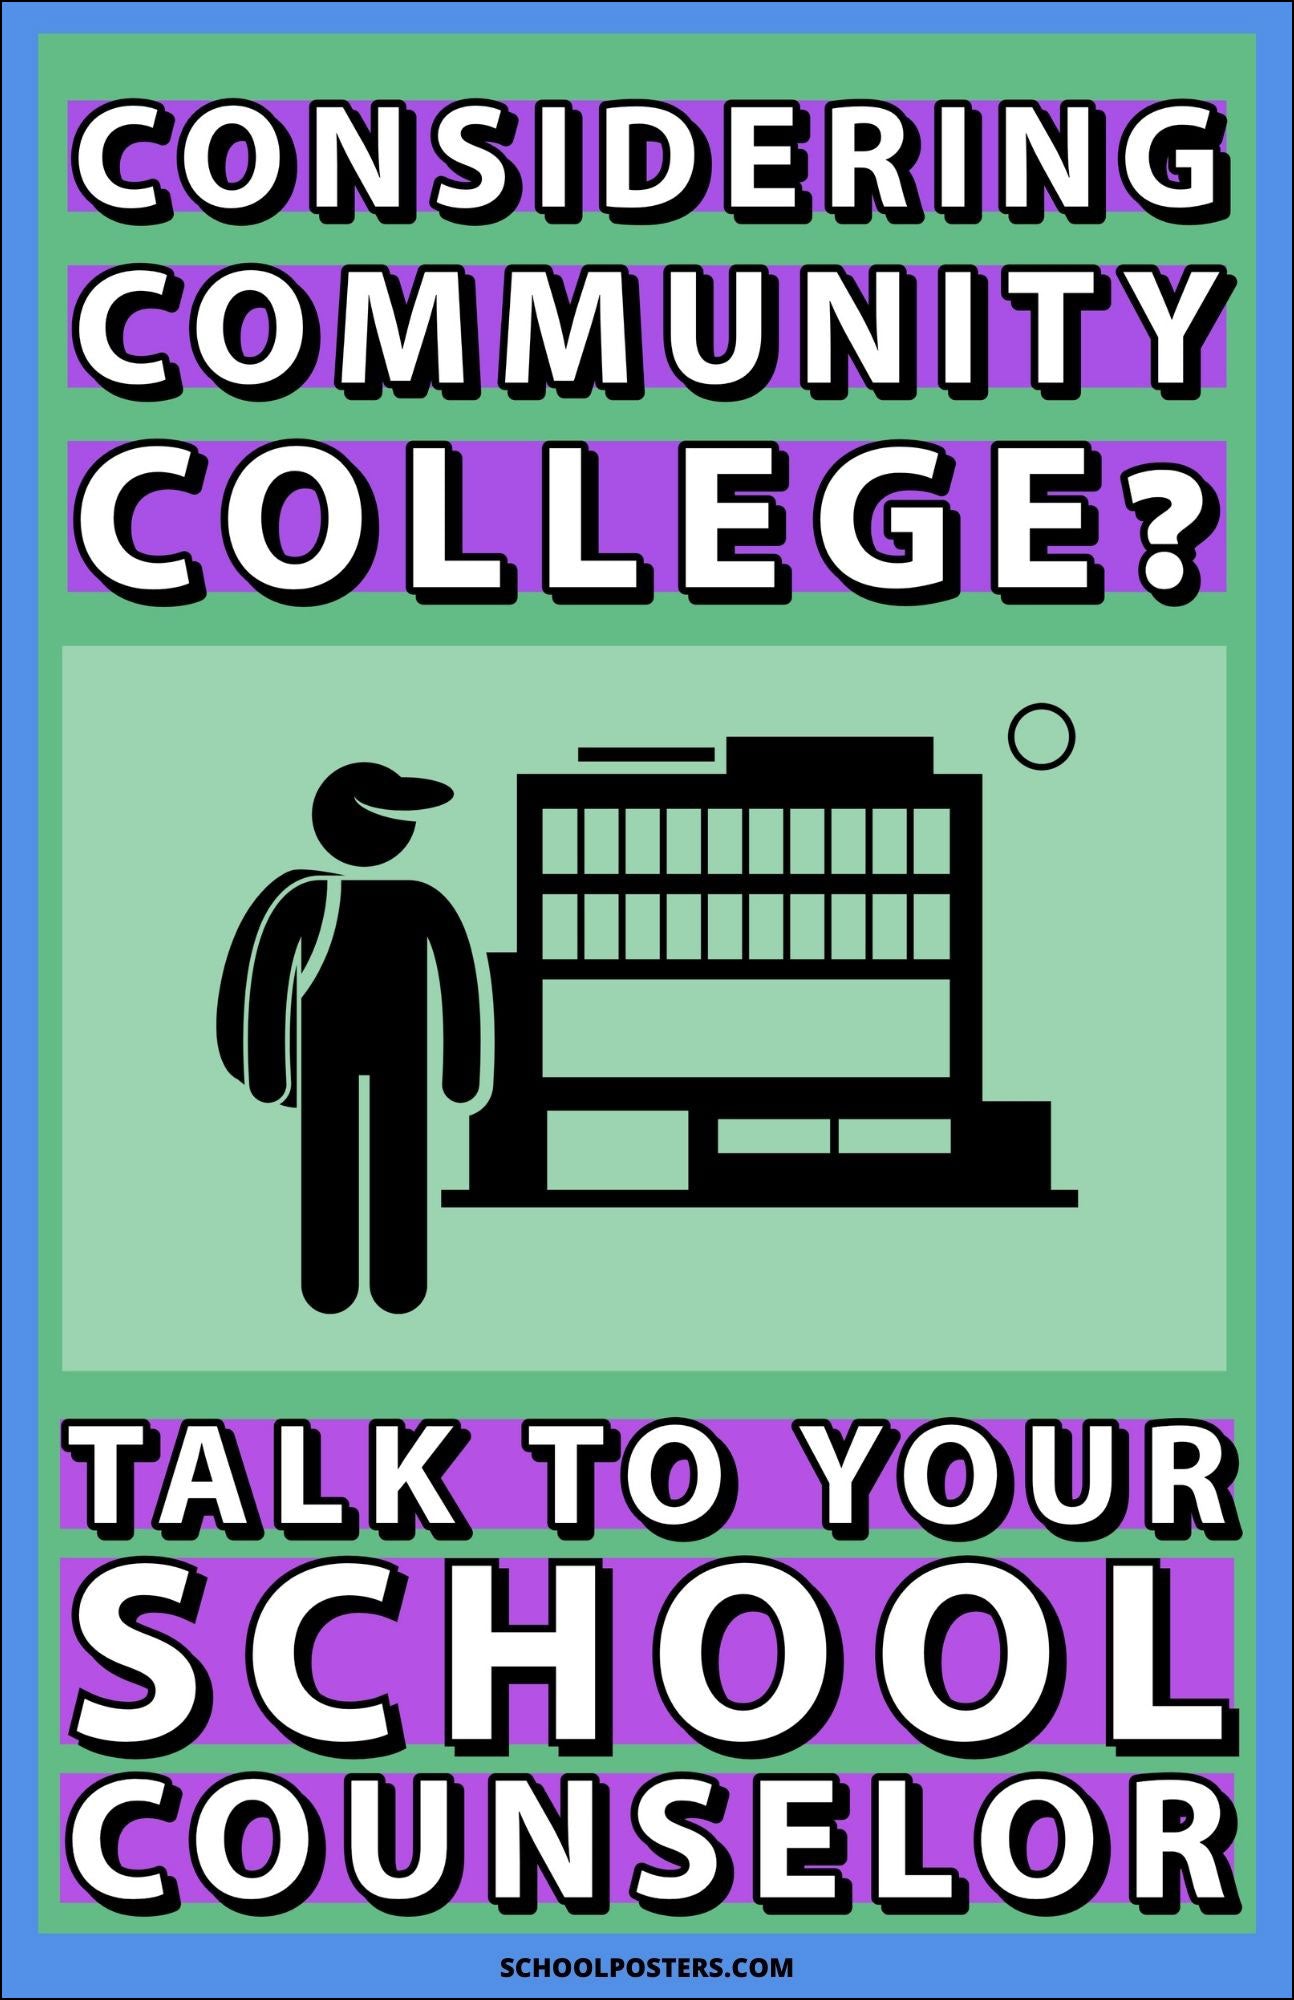 School Counselor Community College Poster